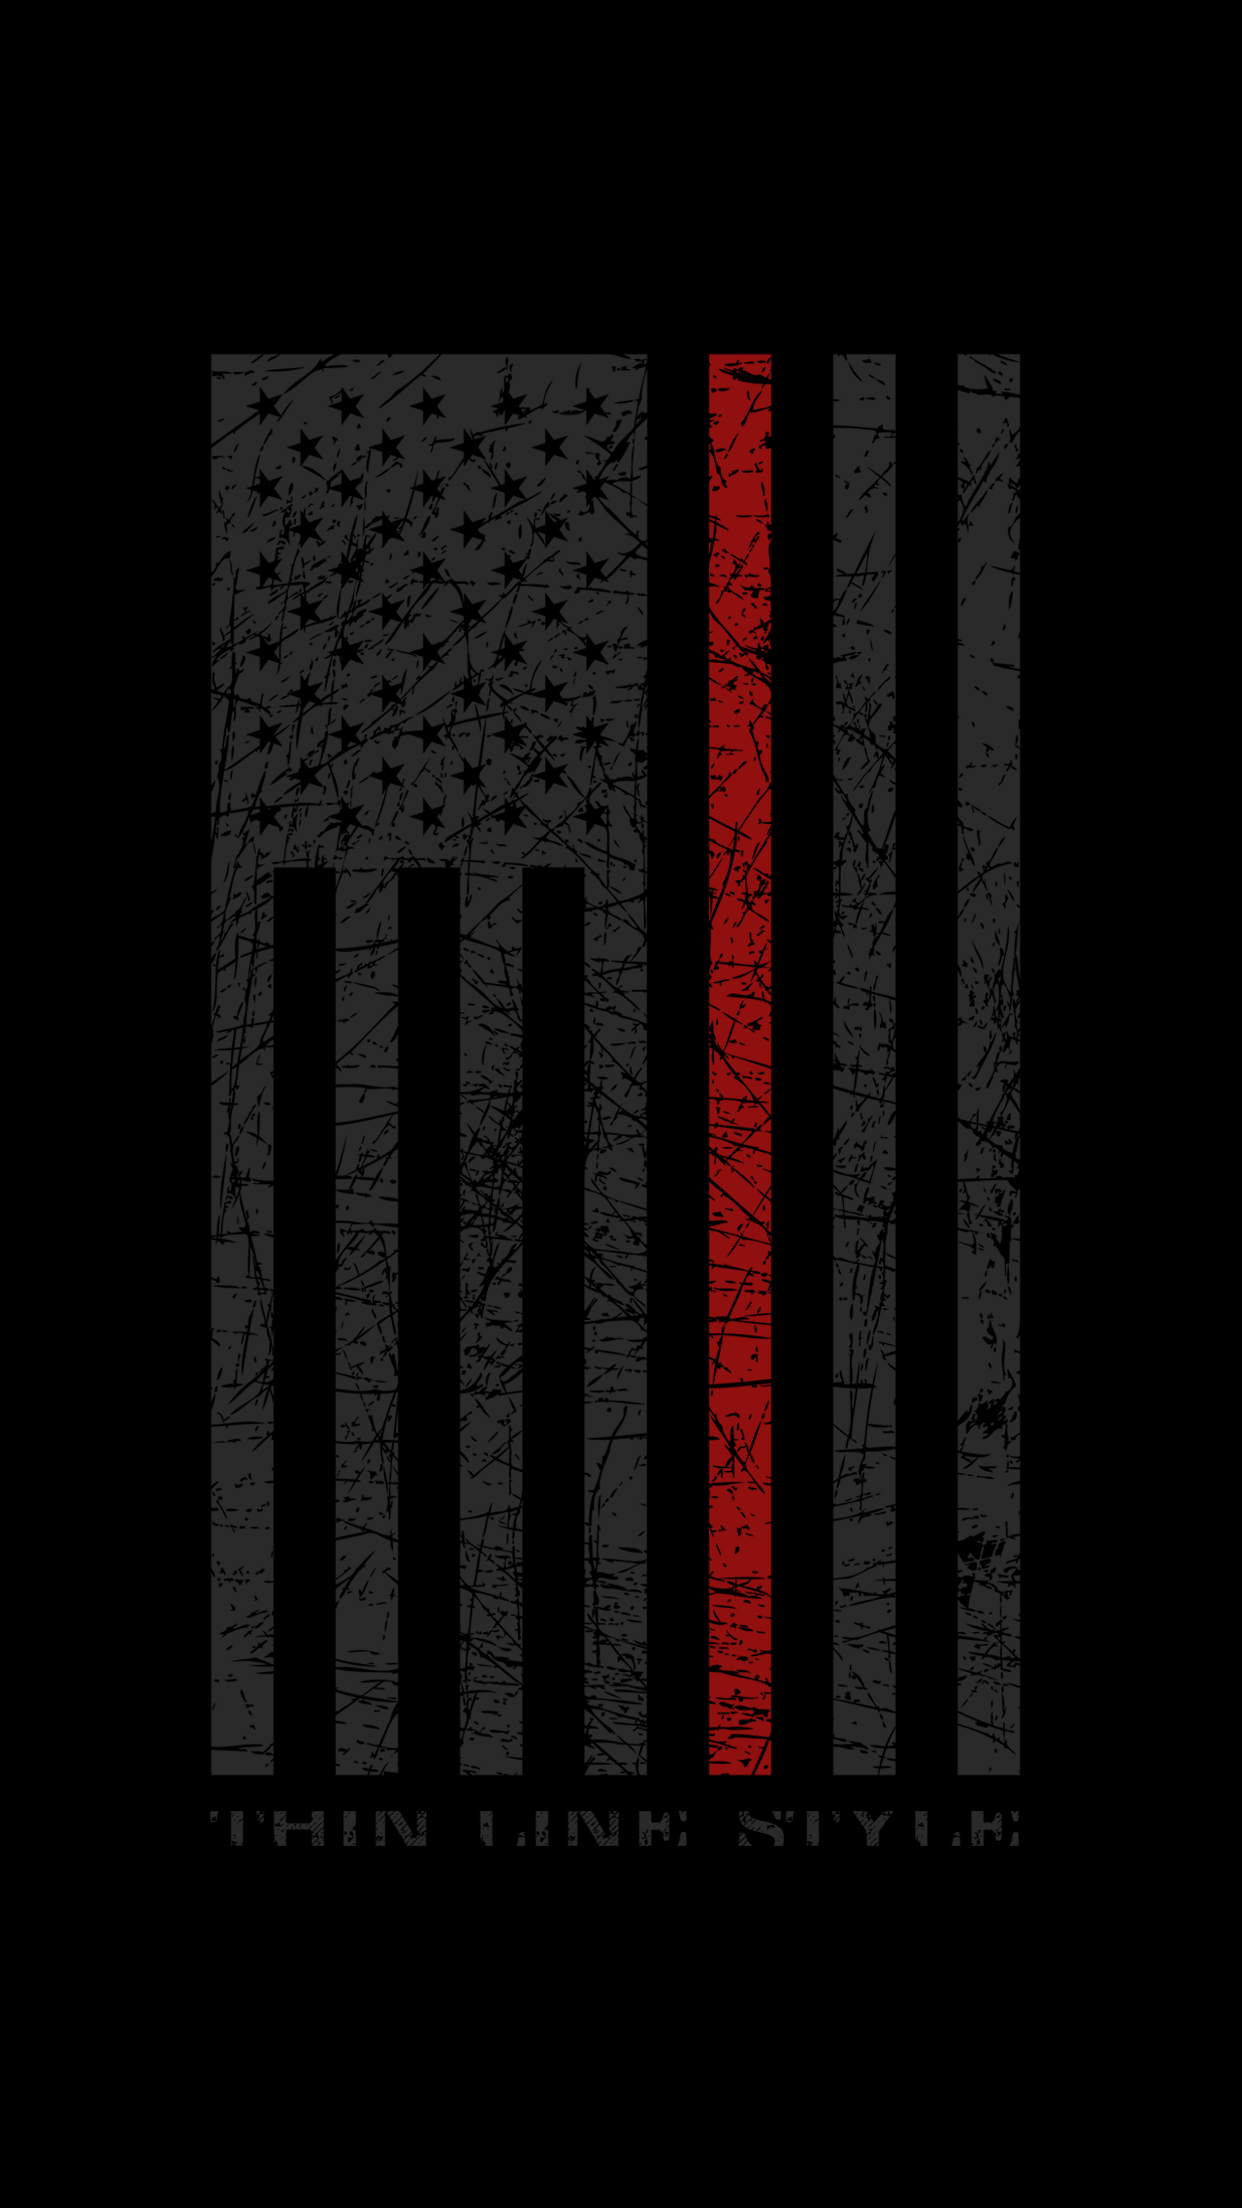 American Flag Police Firefighters Military 30 x 60 inch 100 Cotton Black  and White USA Thin Blue line Black Flag One Towel  Amazonin Home   Kitchen